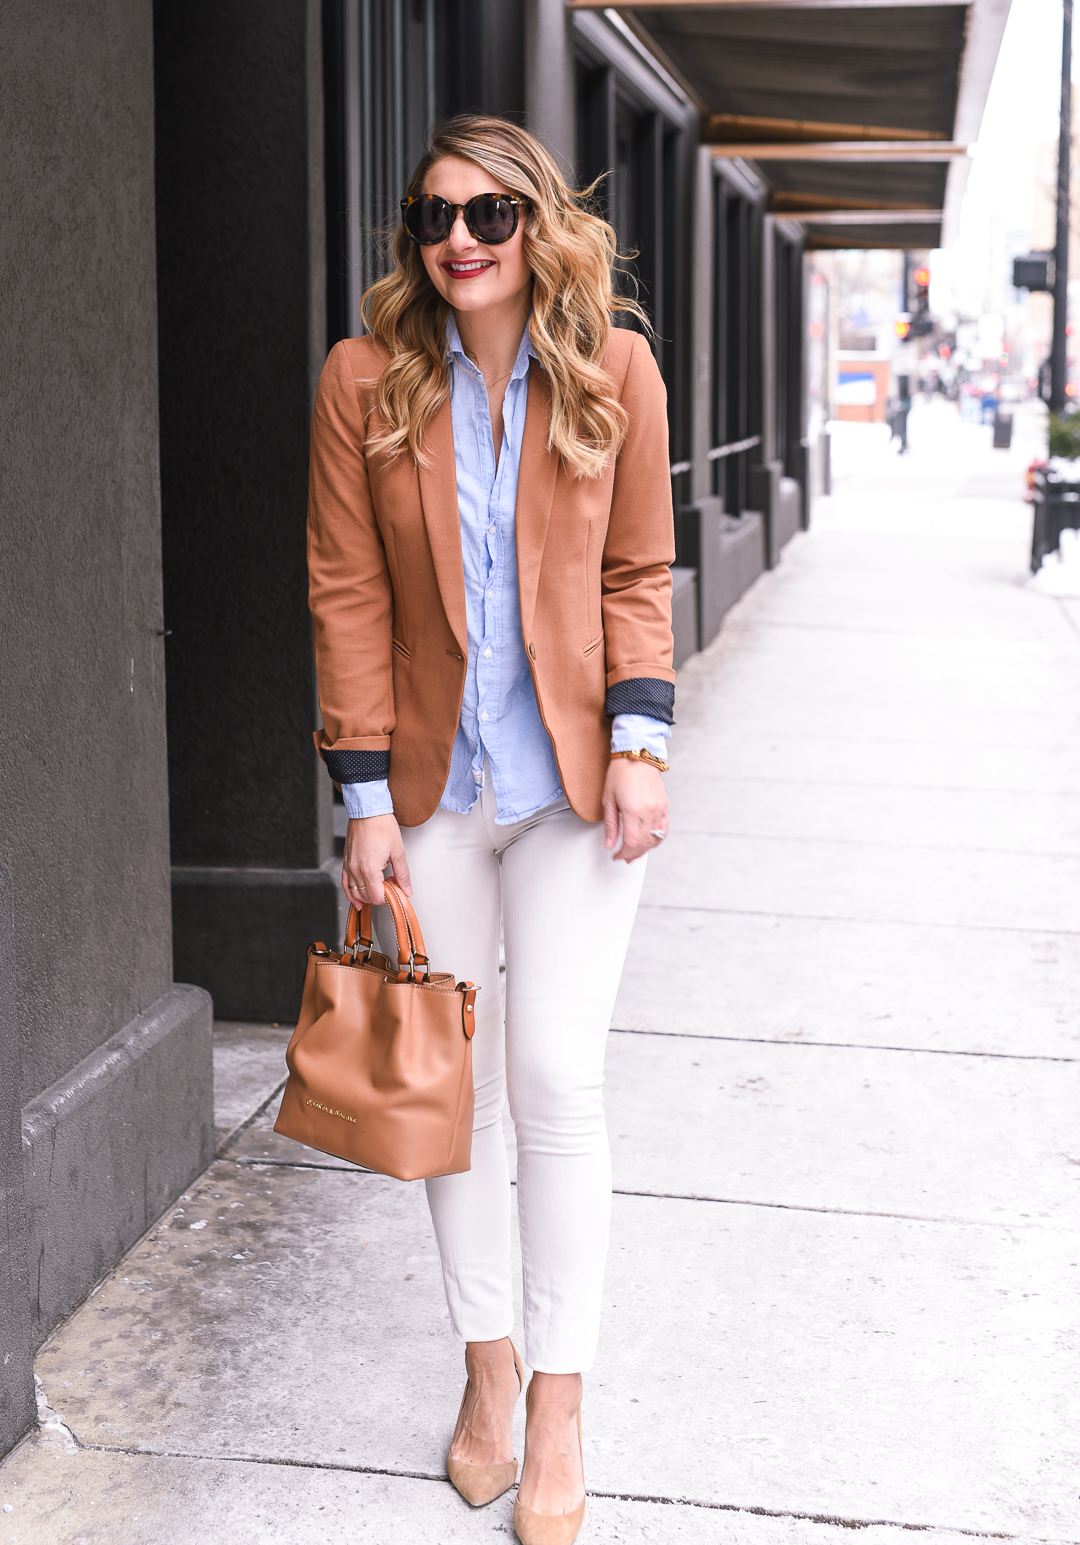 Best Button Up Shirts for Work by popular Chicago fashion blogger Visions of Vogue